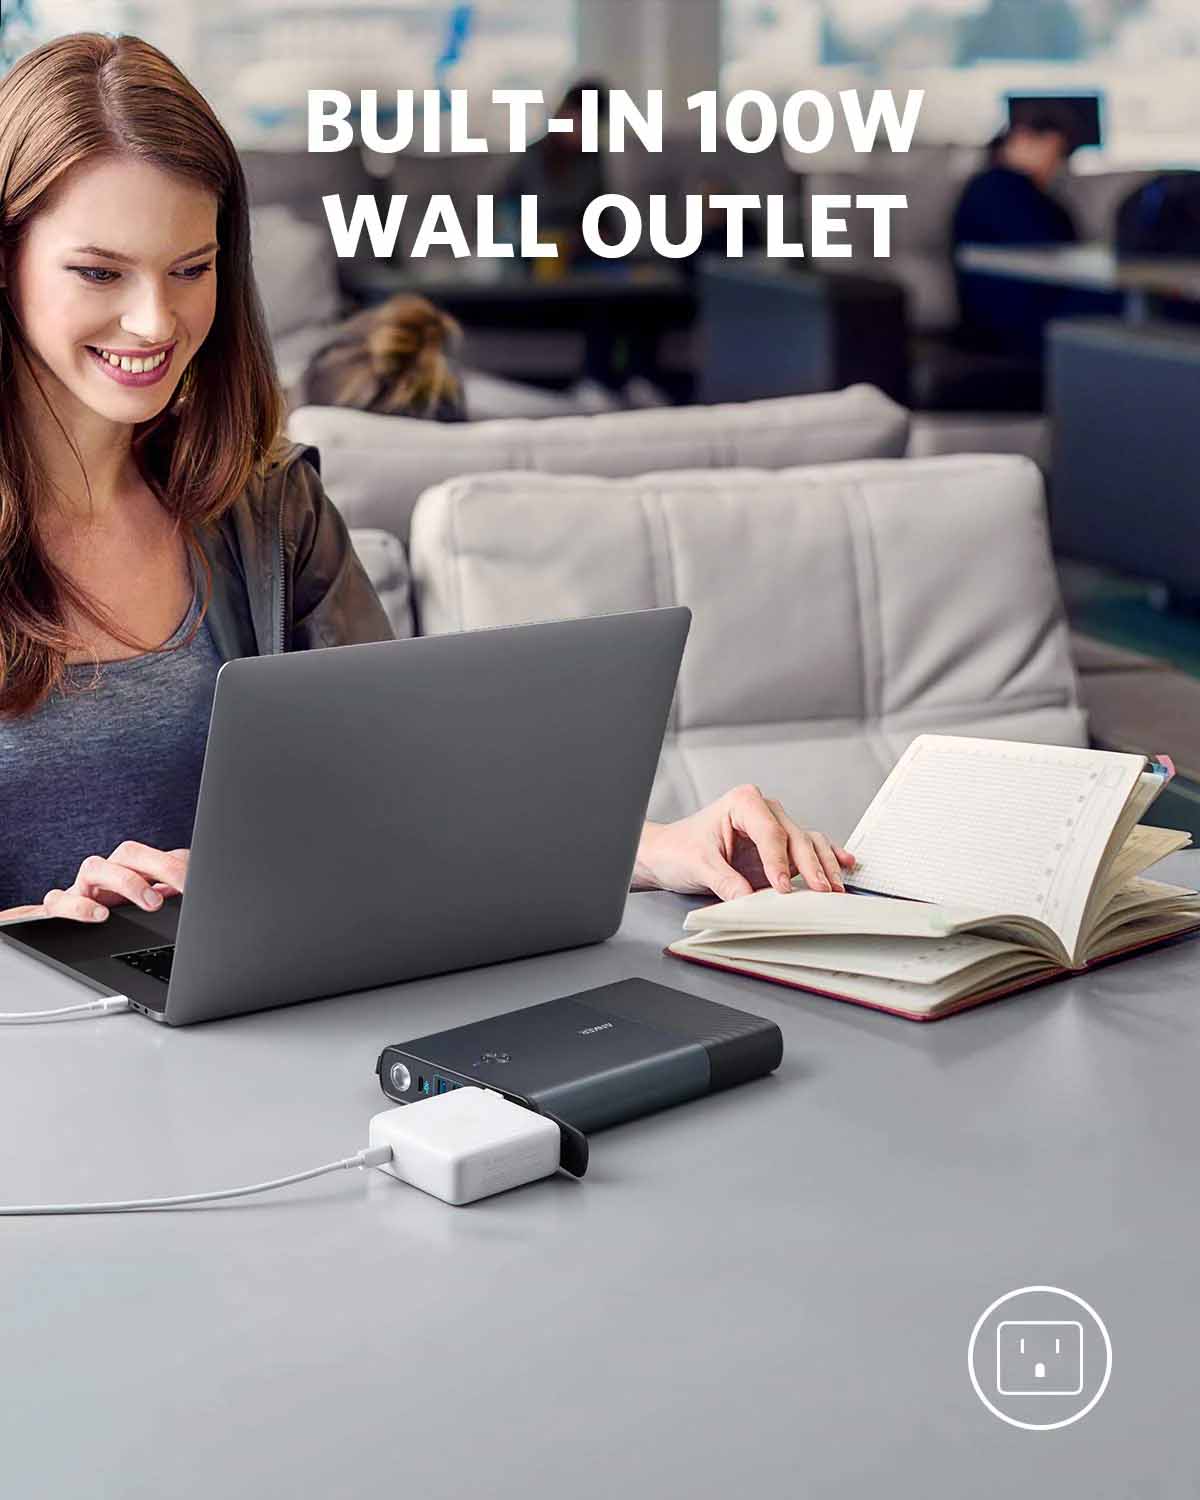 The The Anker 511 PowerHouse 90W Portable Charger Has a 100W Wall Outlet